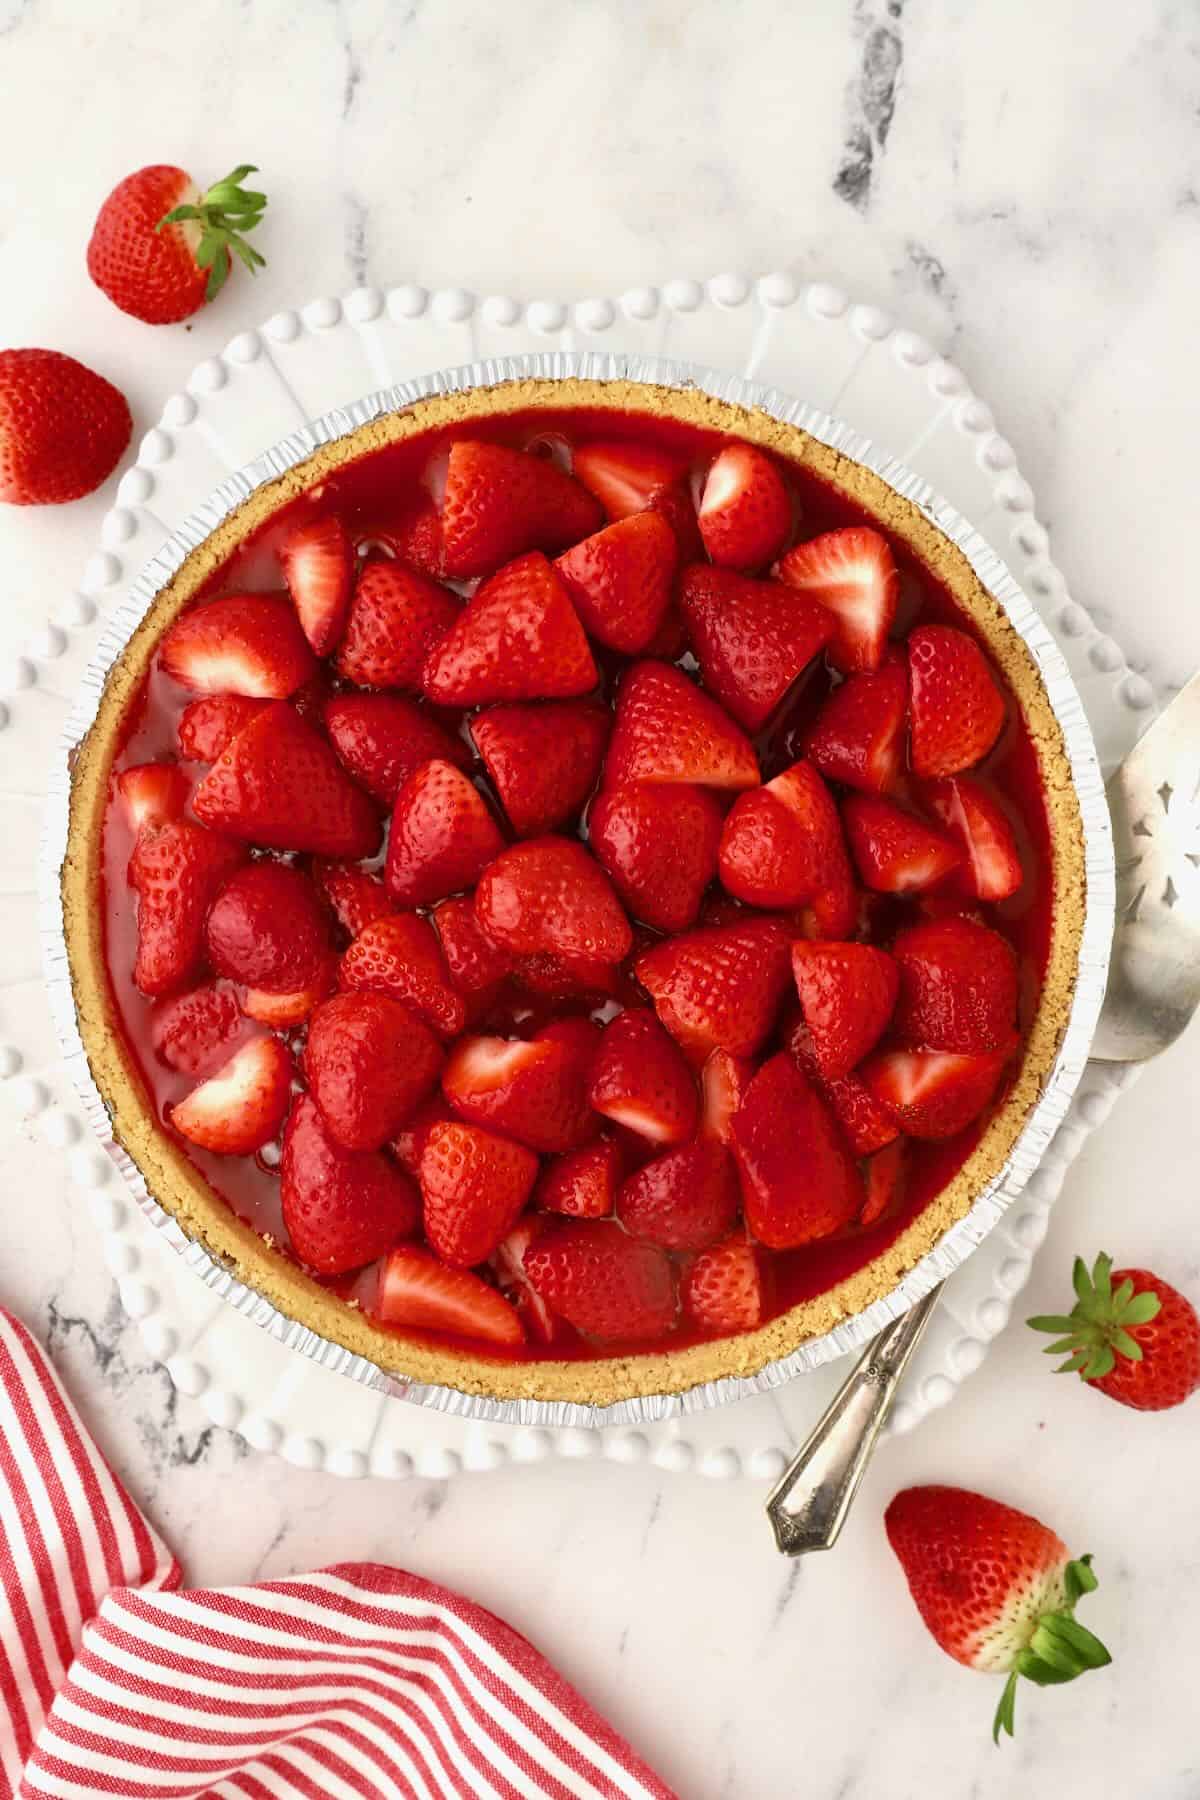 A whole strawberry pie on a white plate.